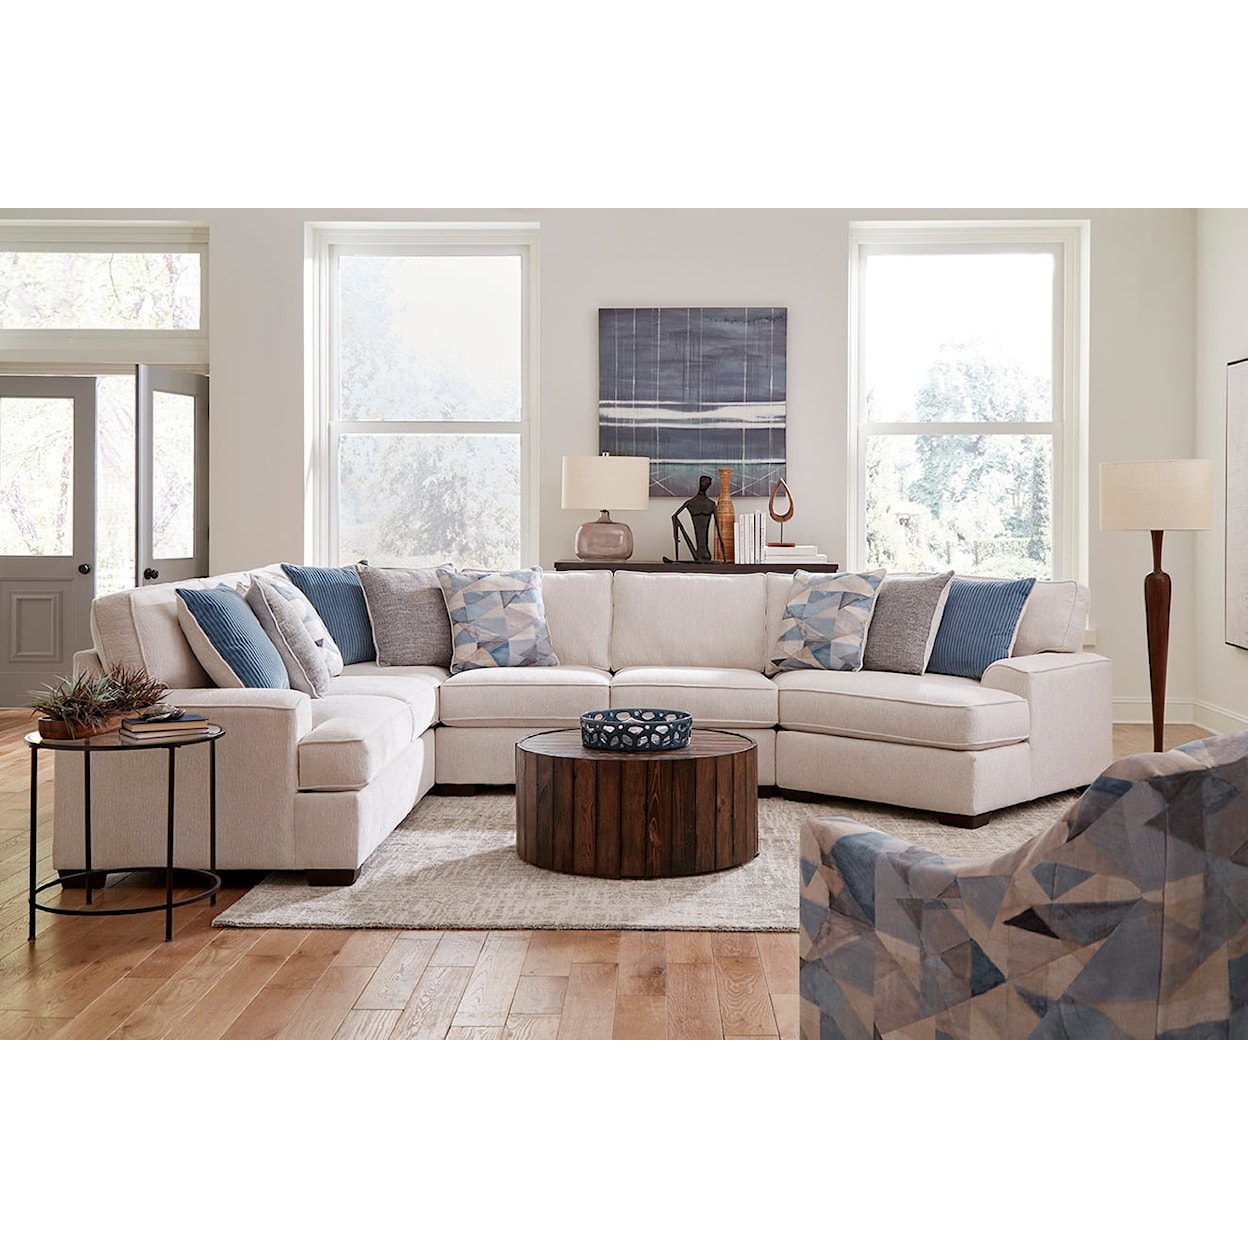 Behold Home BH3550 Rockport 3-Piece Sectional Sofa